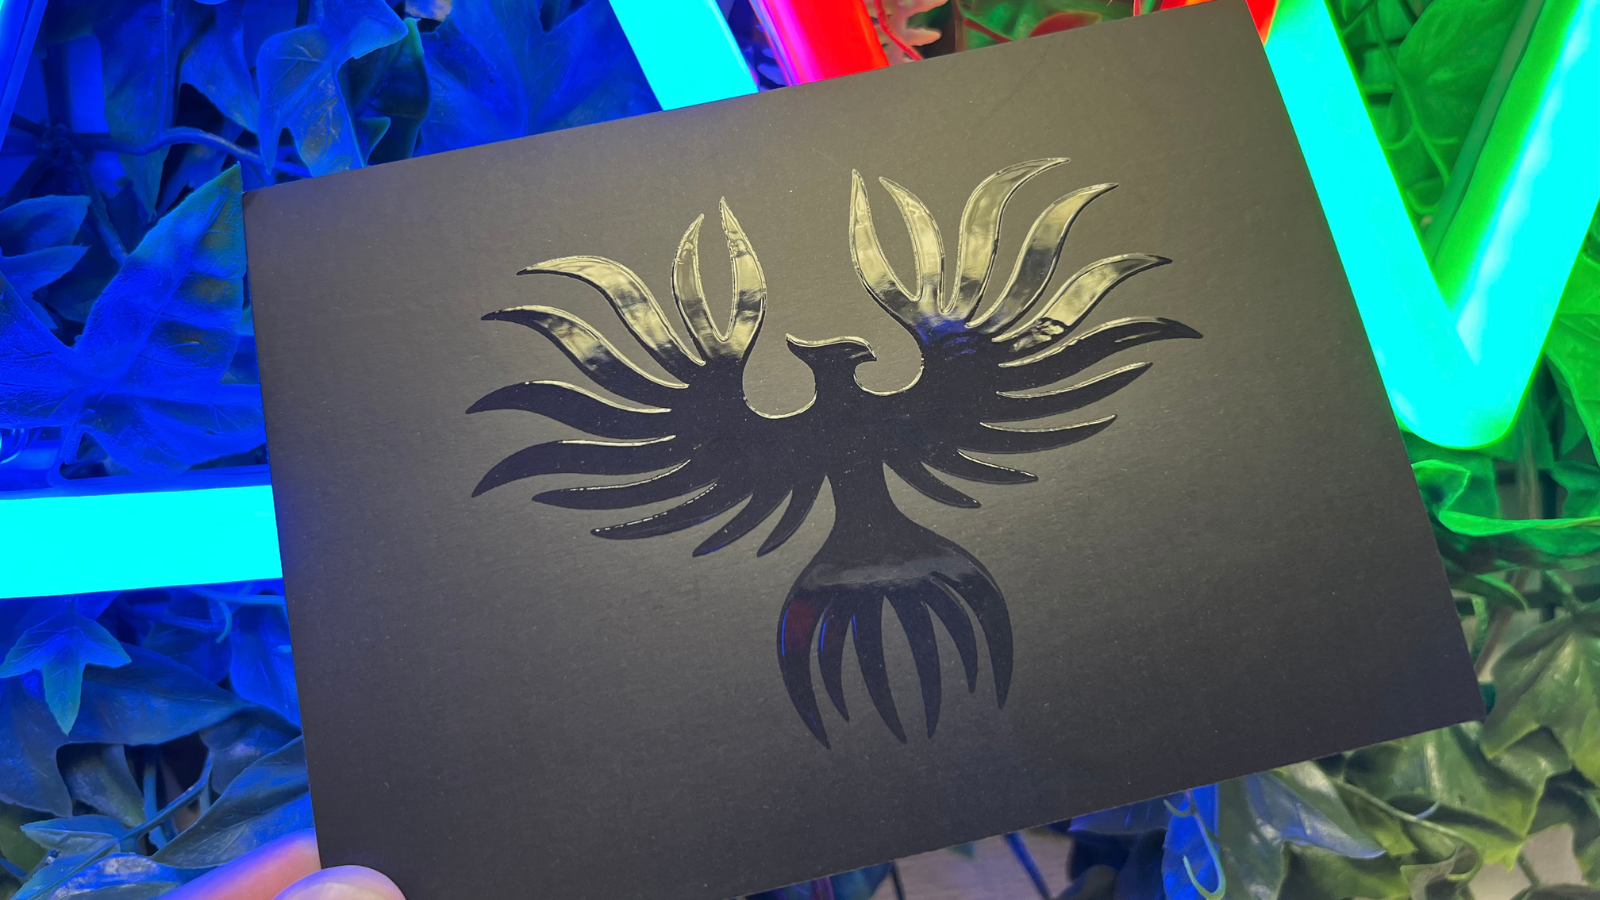 A Teaser from Harman - Phoenix or Eagle? Date confirmed!